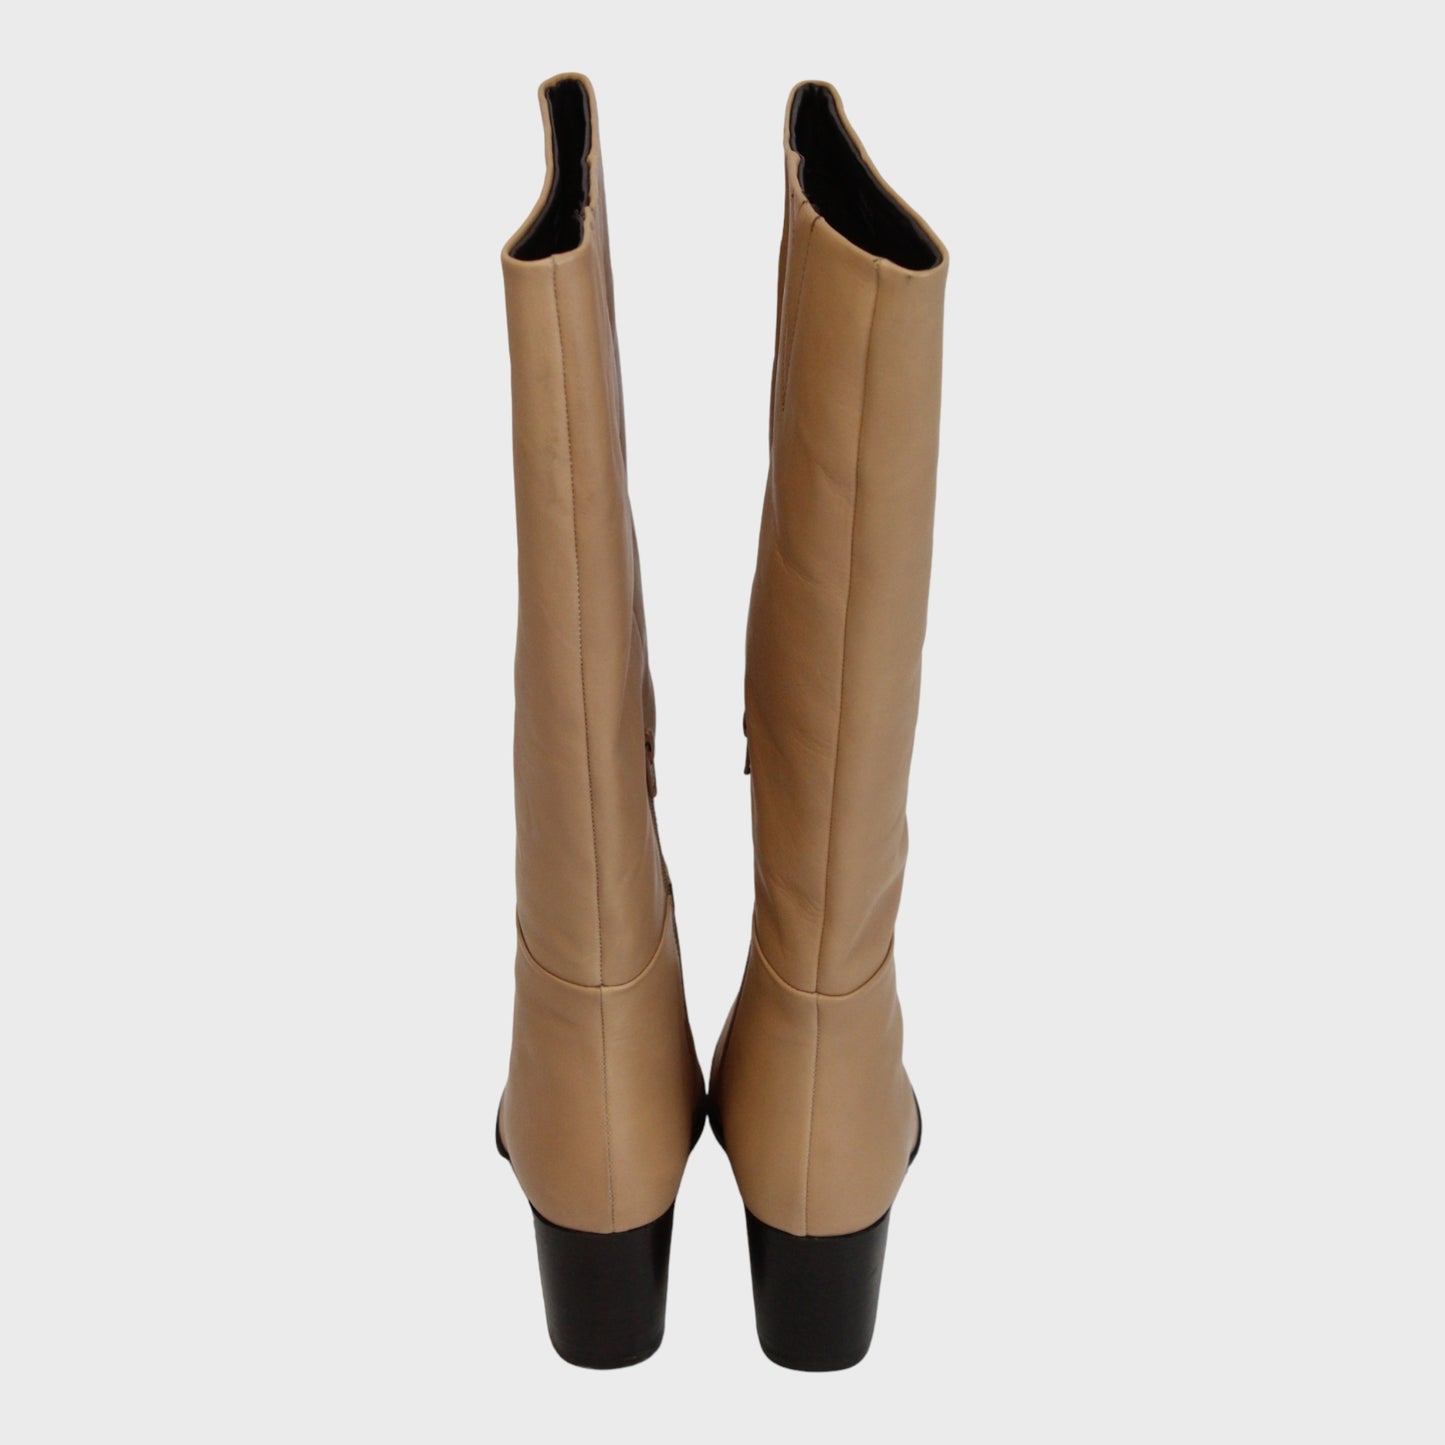 Women's Leather Knee High Boots Light Brown Size 5